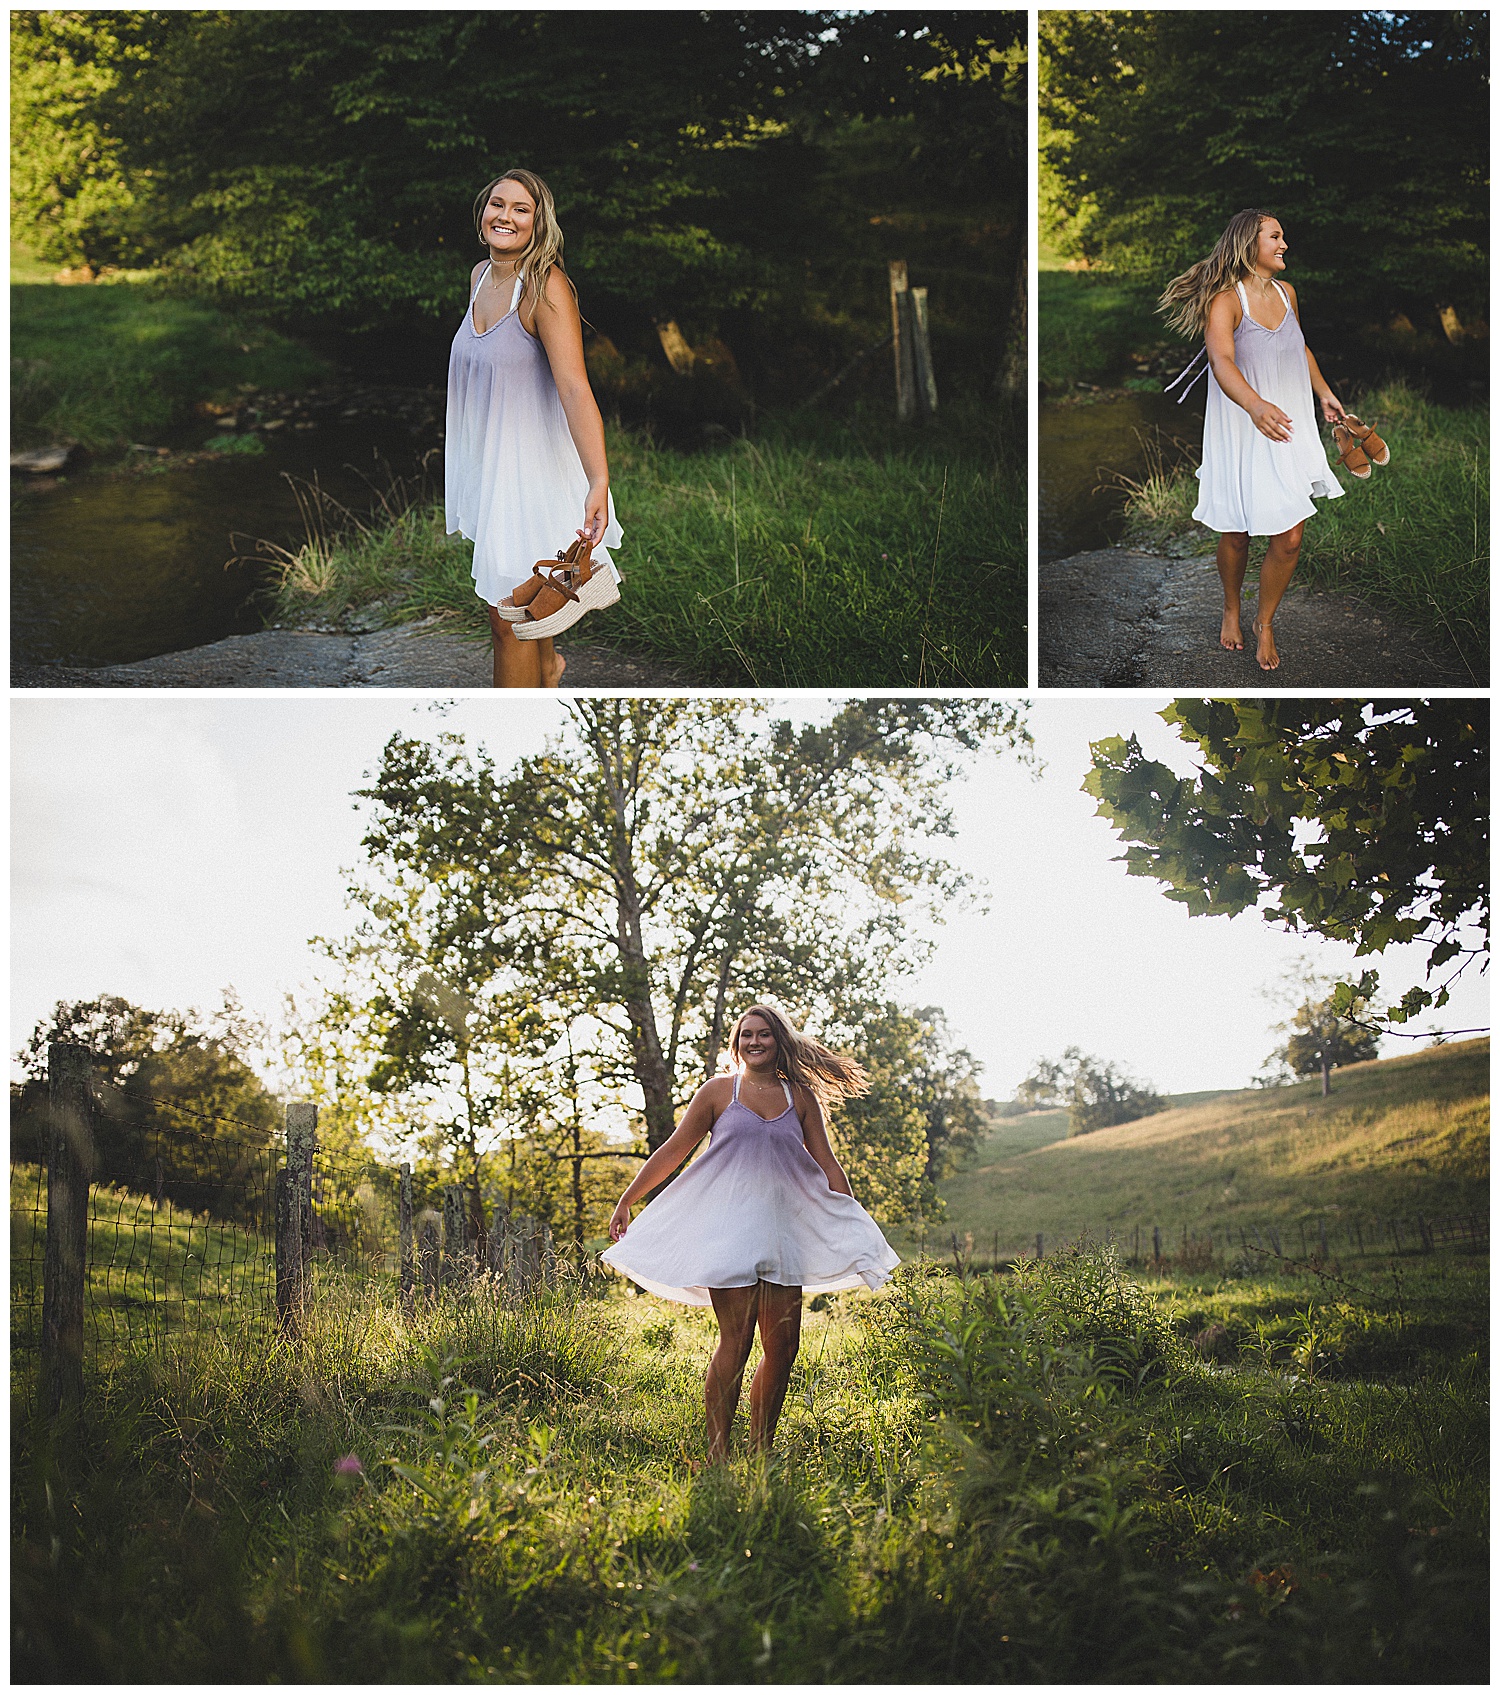 Sunset teenage girl pictures, Southwest Virginia photography 